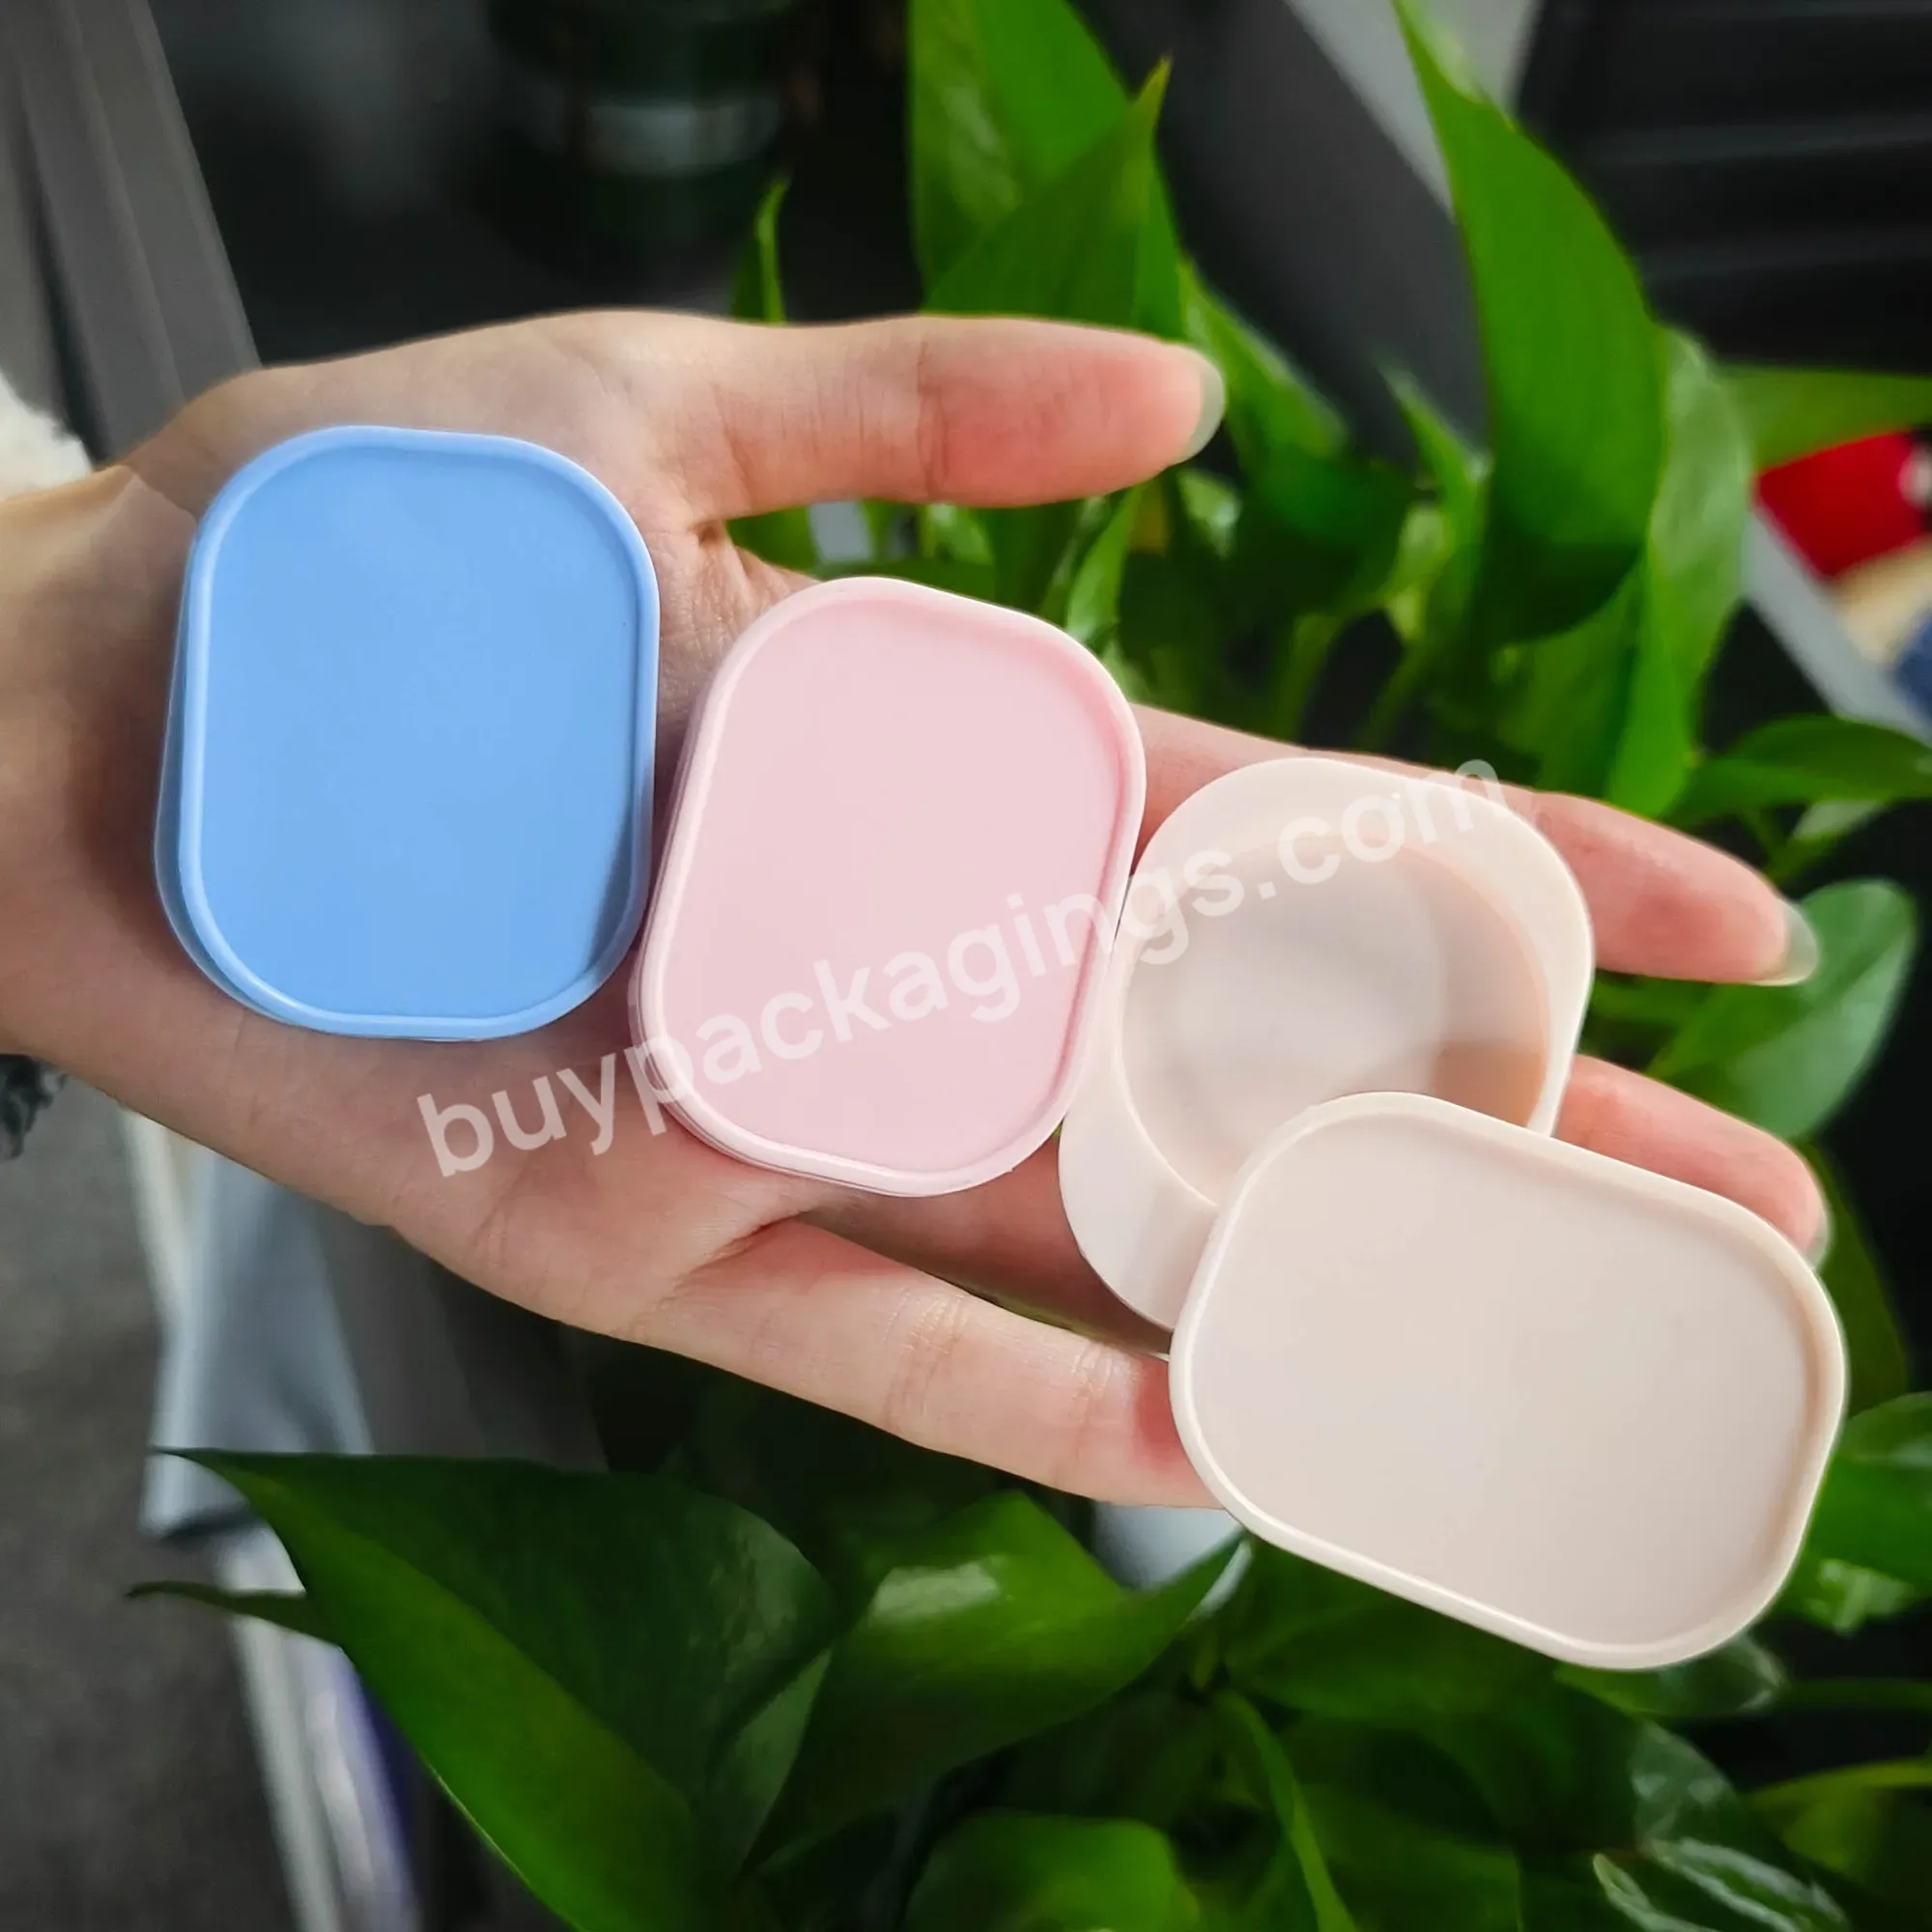 New Shape Sustainable Refillable Cosmetic Packaging Powder Compact Case With Rotated Closure - Buy Eye Shadow Eye Shadow Palette Eye Shadow Palette Private Label Eye Shadow Applicator Eye Shadow Case,Palette For Women Eye Shadow Eyeshadow Palette Mak